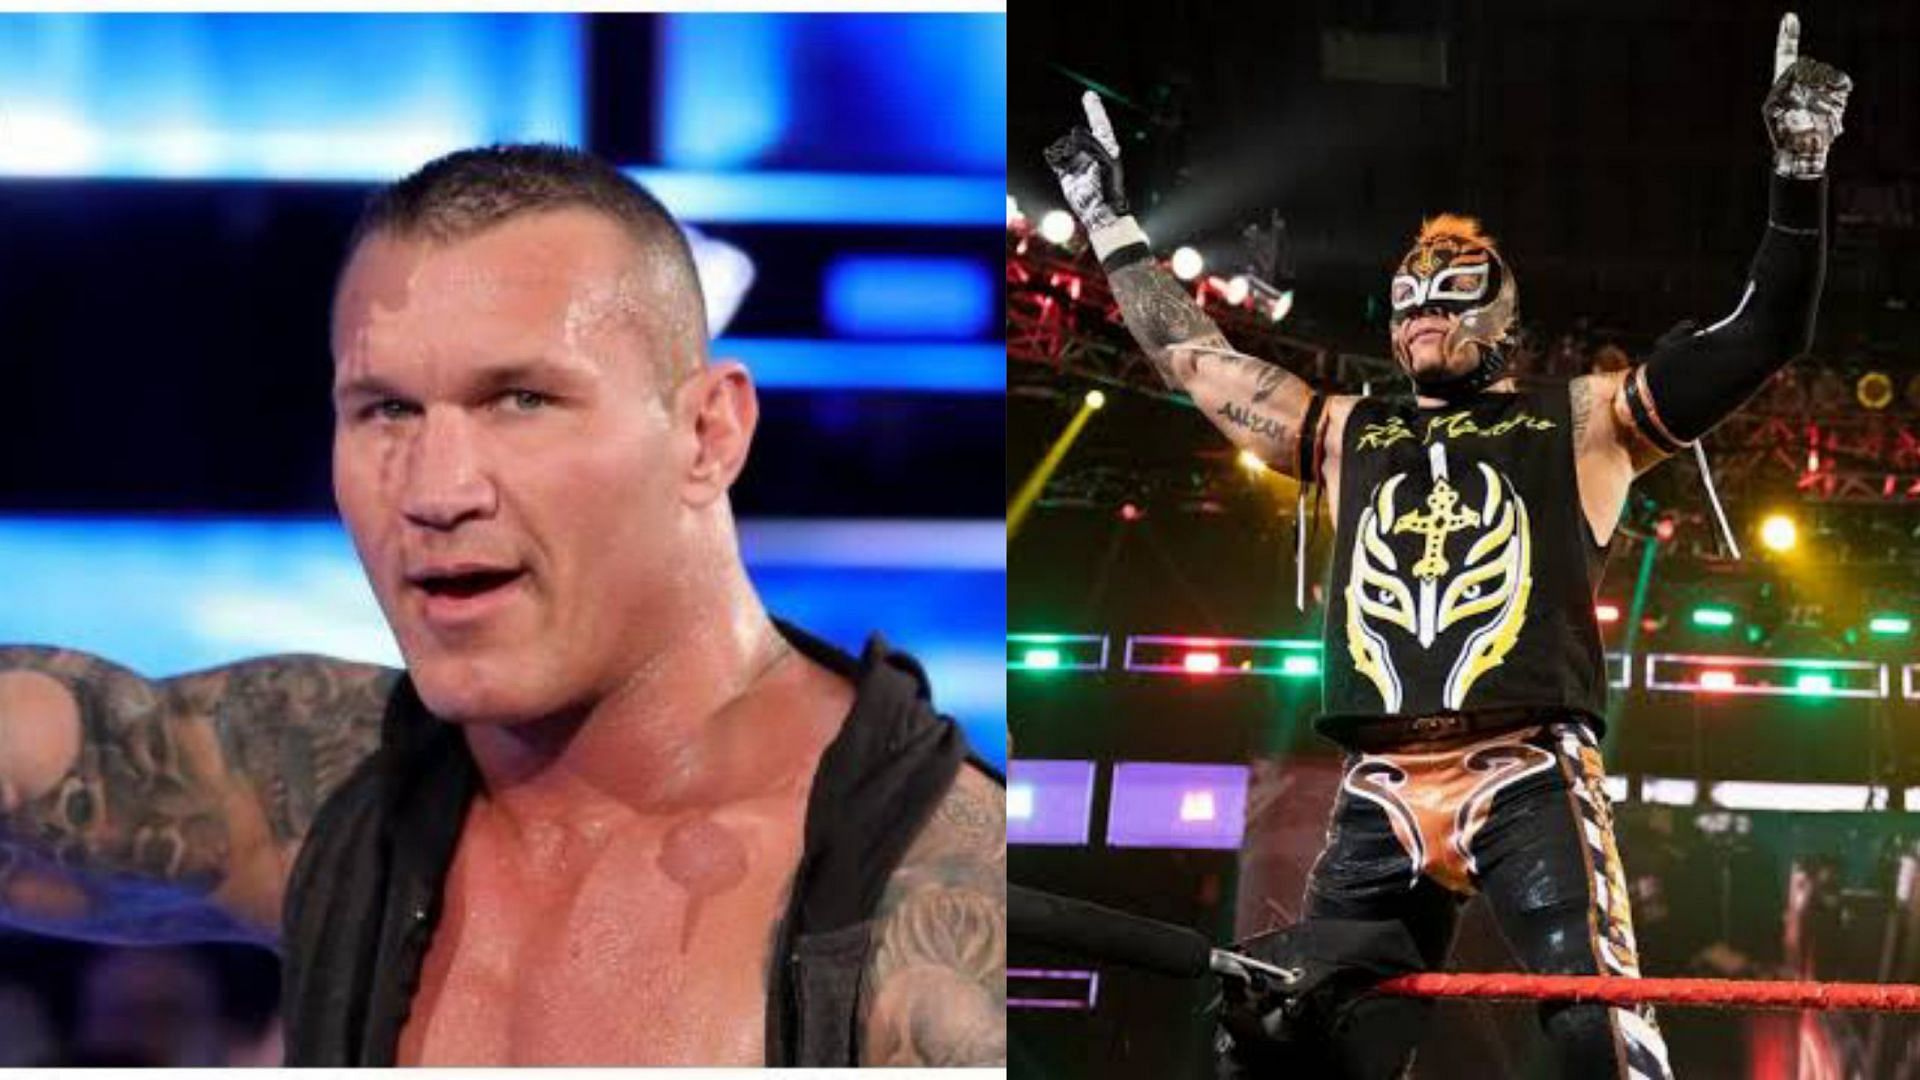 These former WWE World Champions are now wrestling in a team